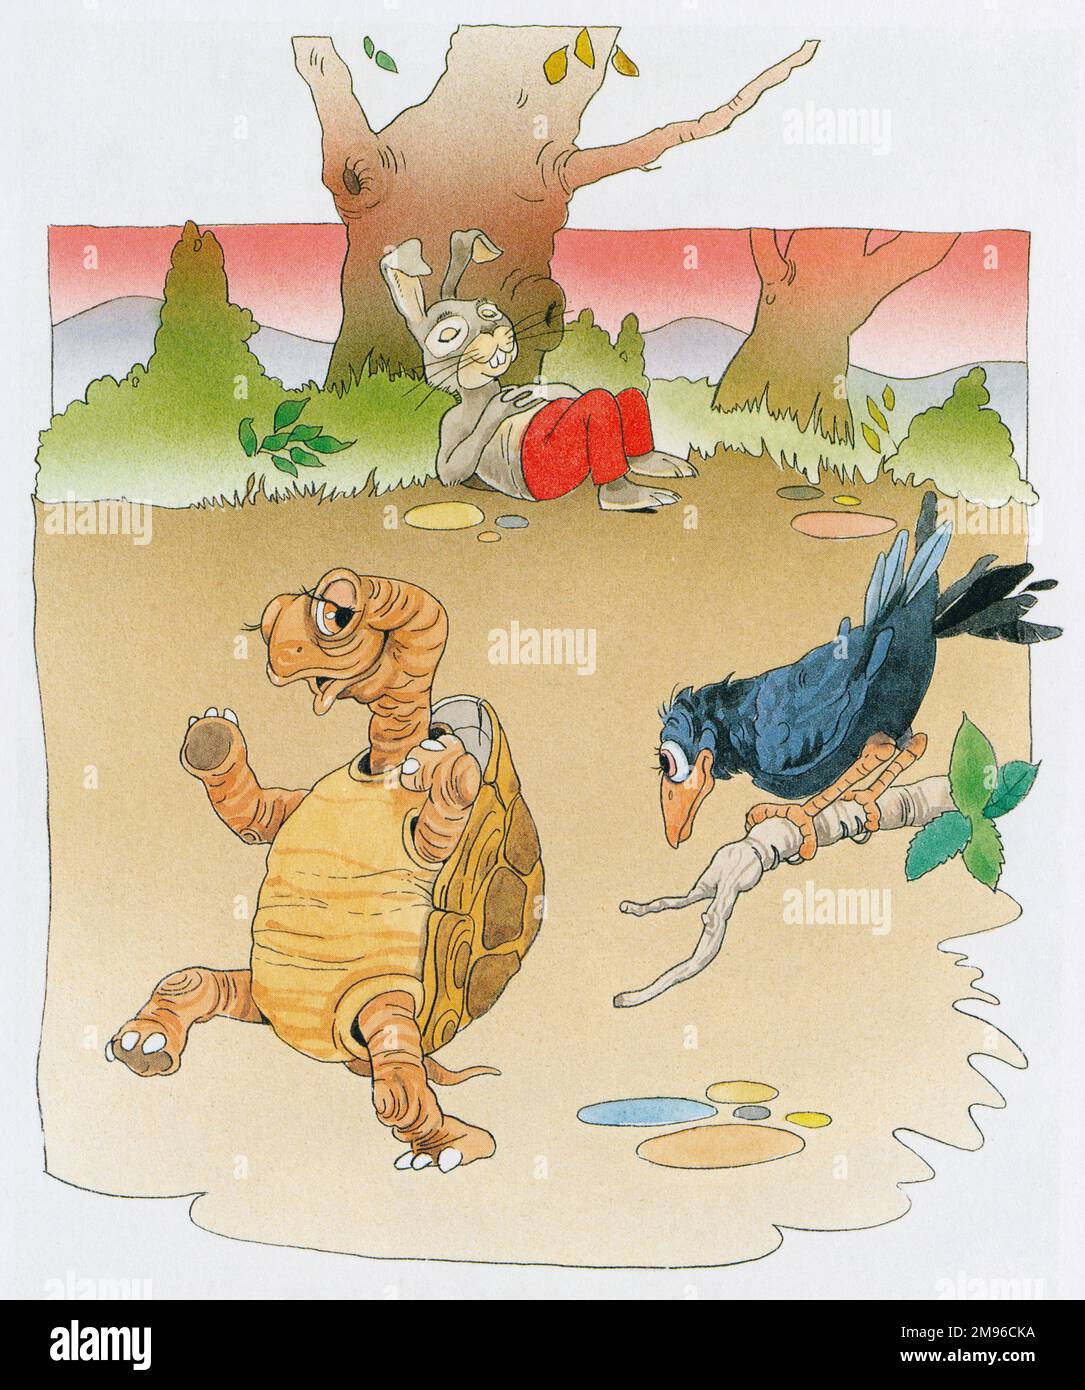 The complacent hare takes a nap under a tree while the Tortoise romps home in this cautionary tale advocating the slow and steady over the fast and flippant. Illustration by Malcolm Greensmith. Stock Photo